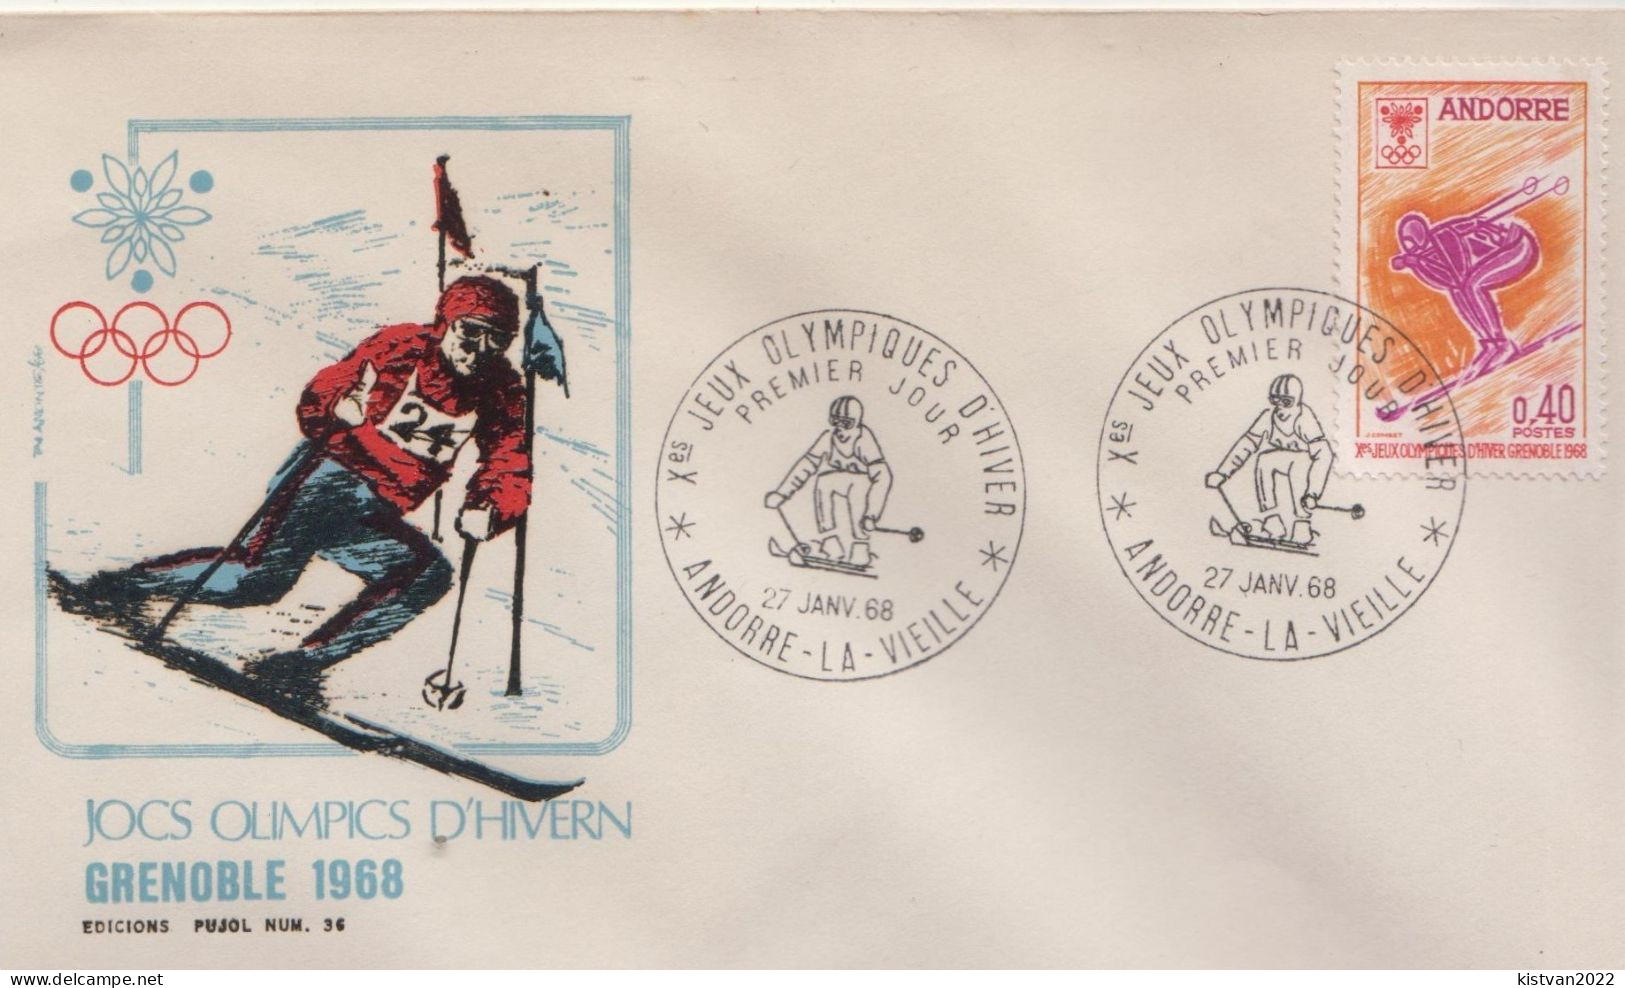 Andorra Stamp On FDC - Hiver 1968: Grenoble